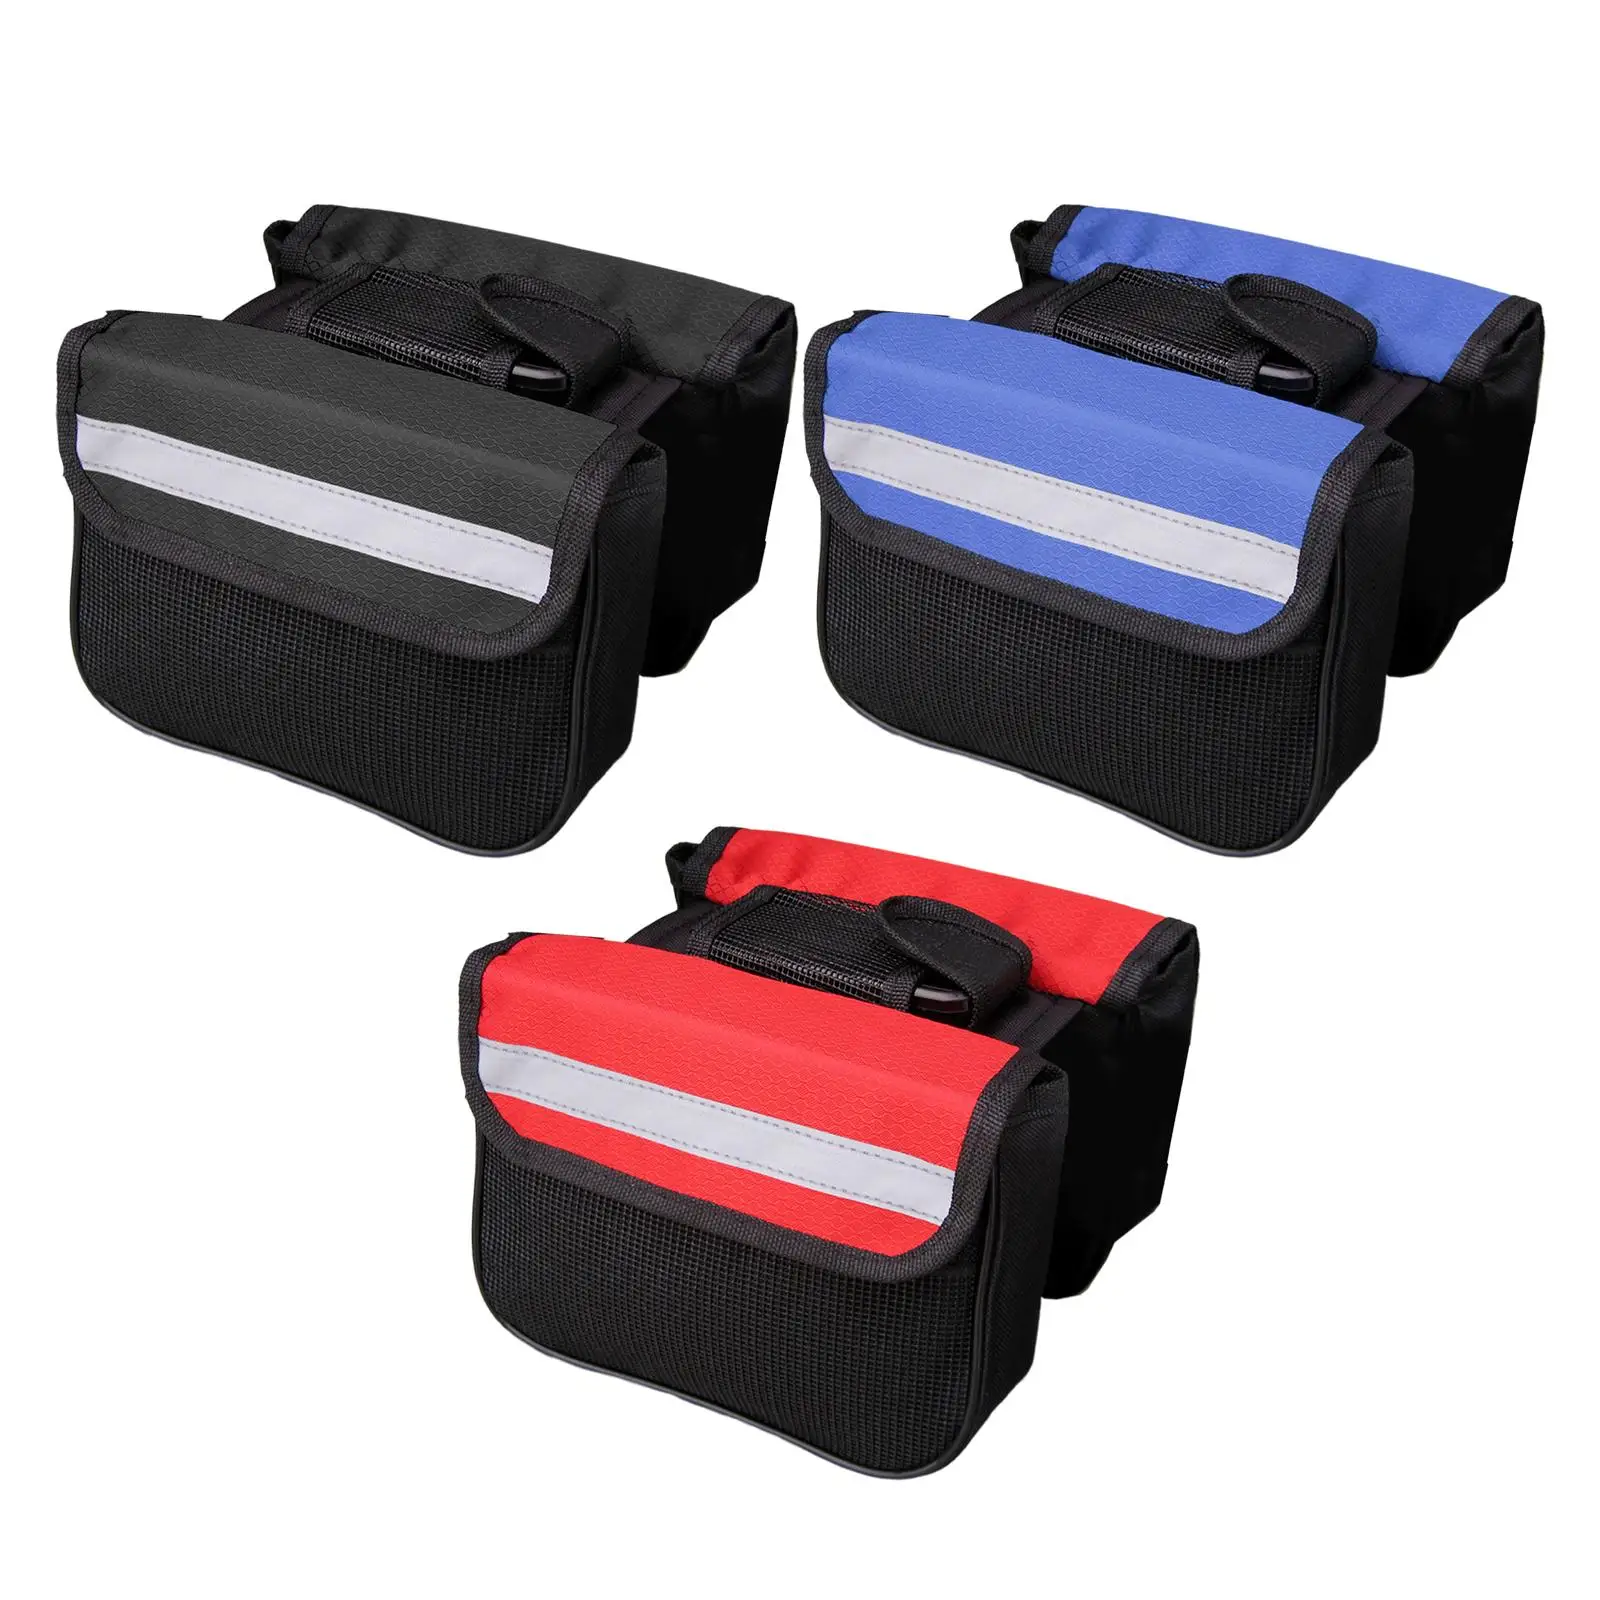 Bike Panniers Bag Front Frame Bag Pouch Repair Tool Placement Bag Luggage Double Side Bag for Mountain Bikes